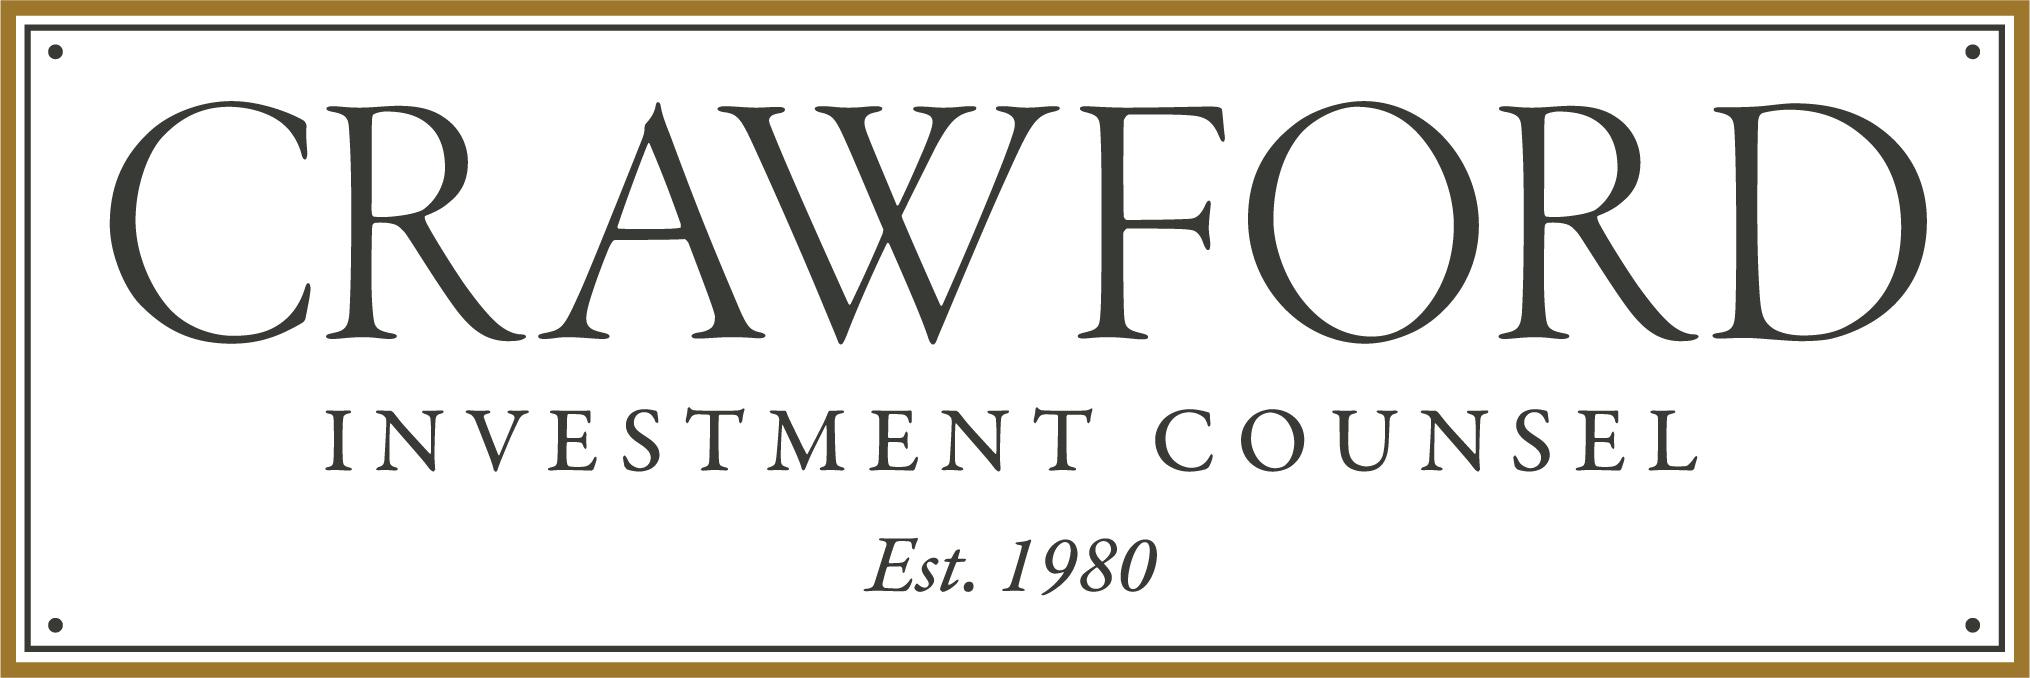 Crawford-Investment-Counsel-Inc-logo